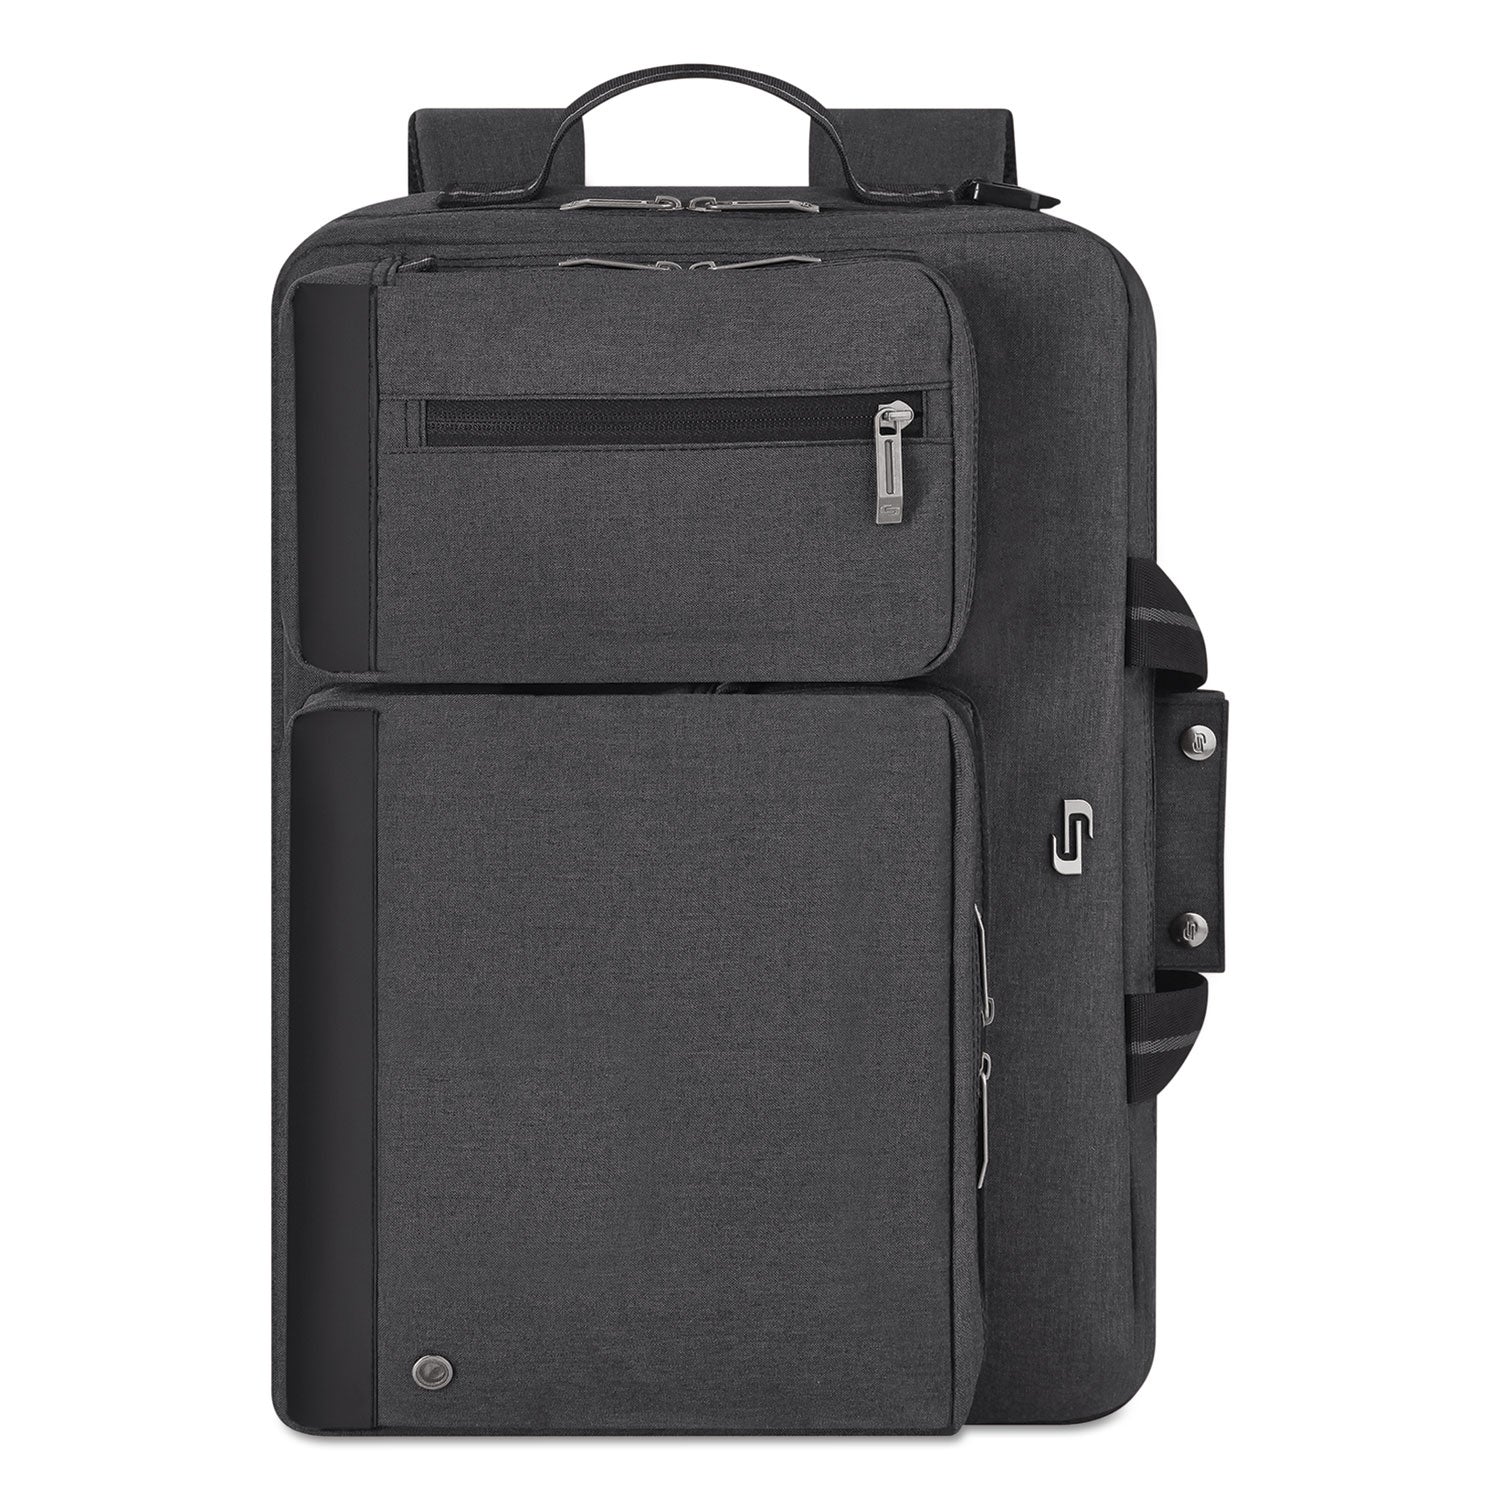 urban-hybrid-briefcase-fits-devices-up-to-156-polyester-1675-x-4-x-12-gray_uslubn31010 - 6